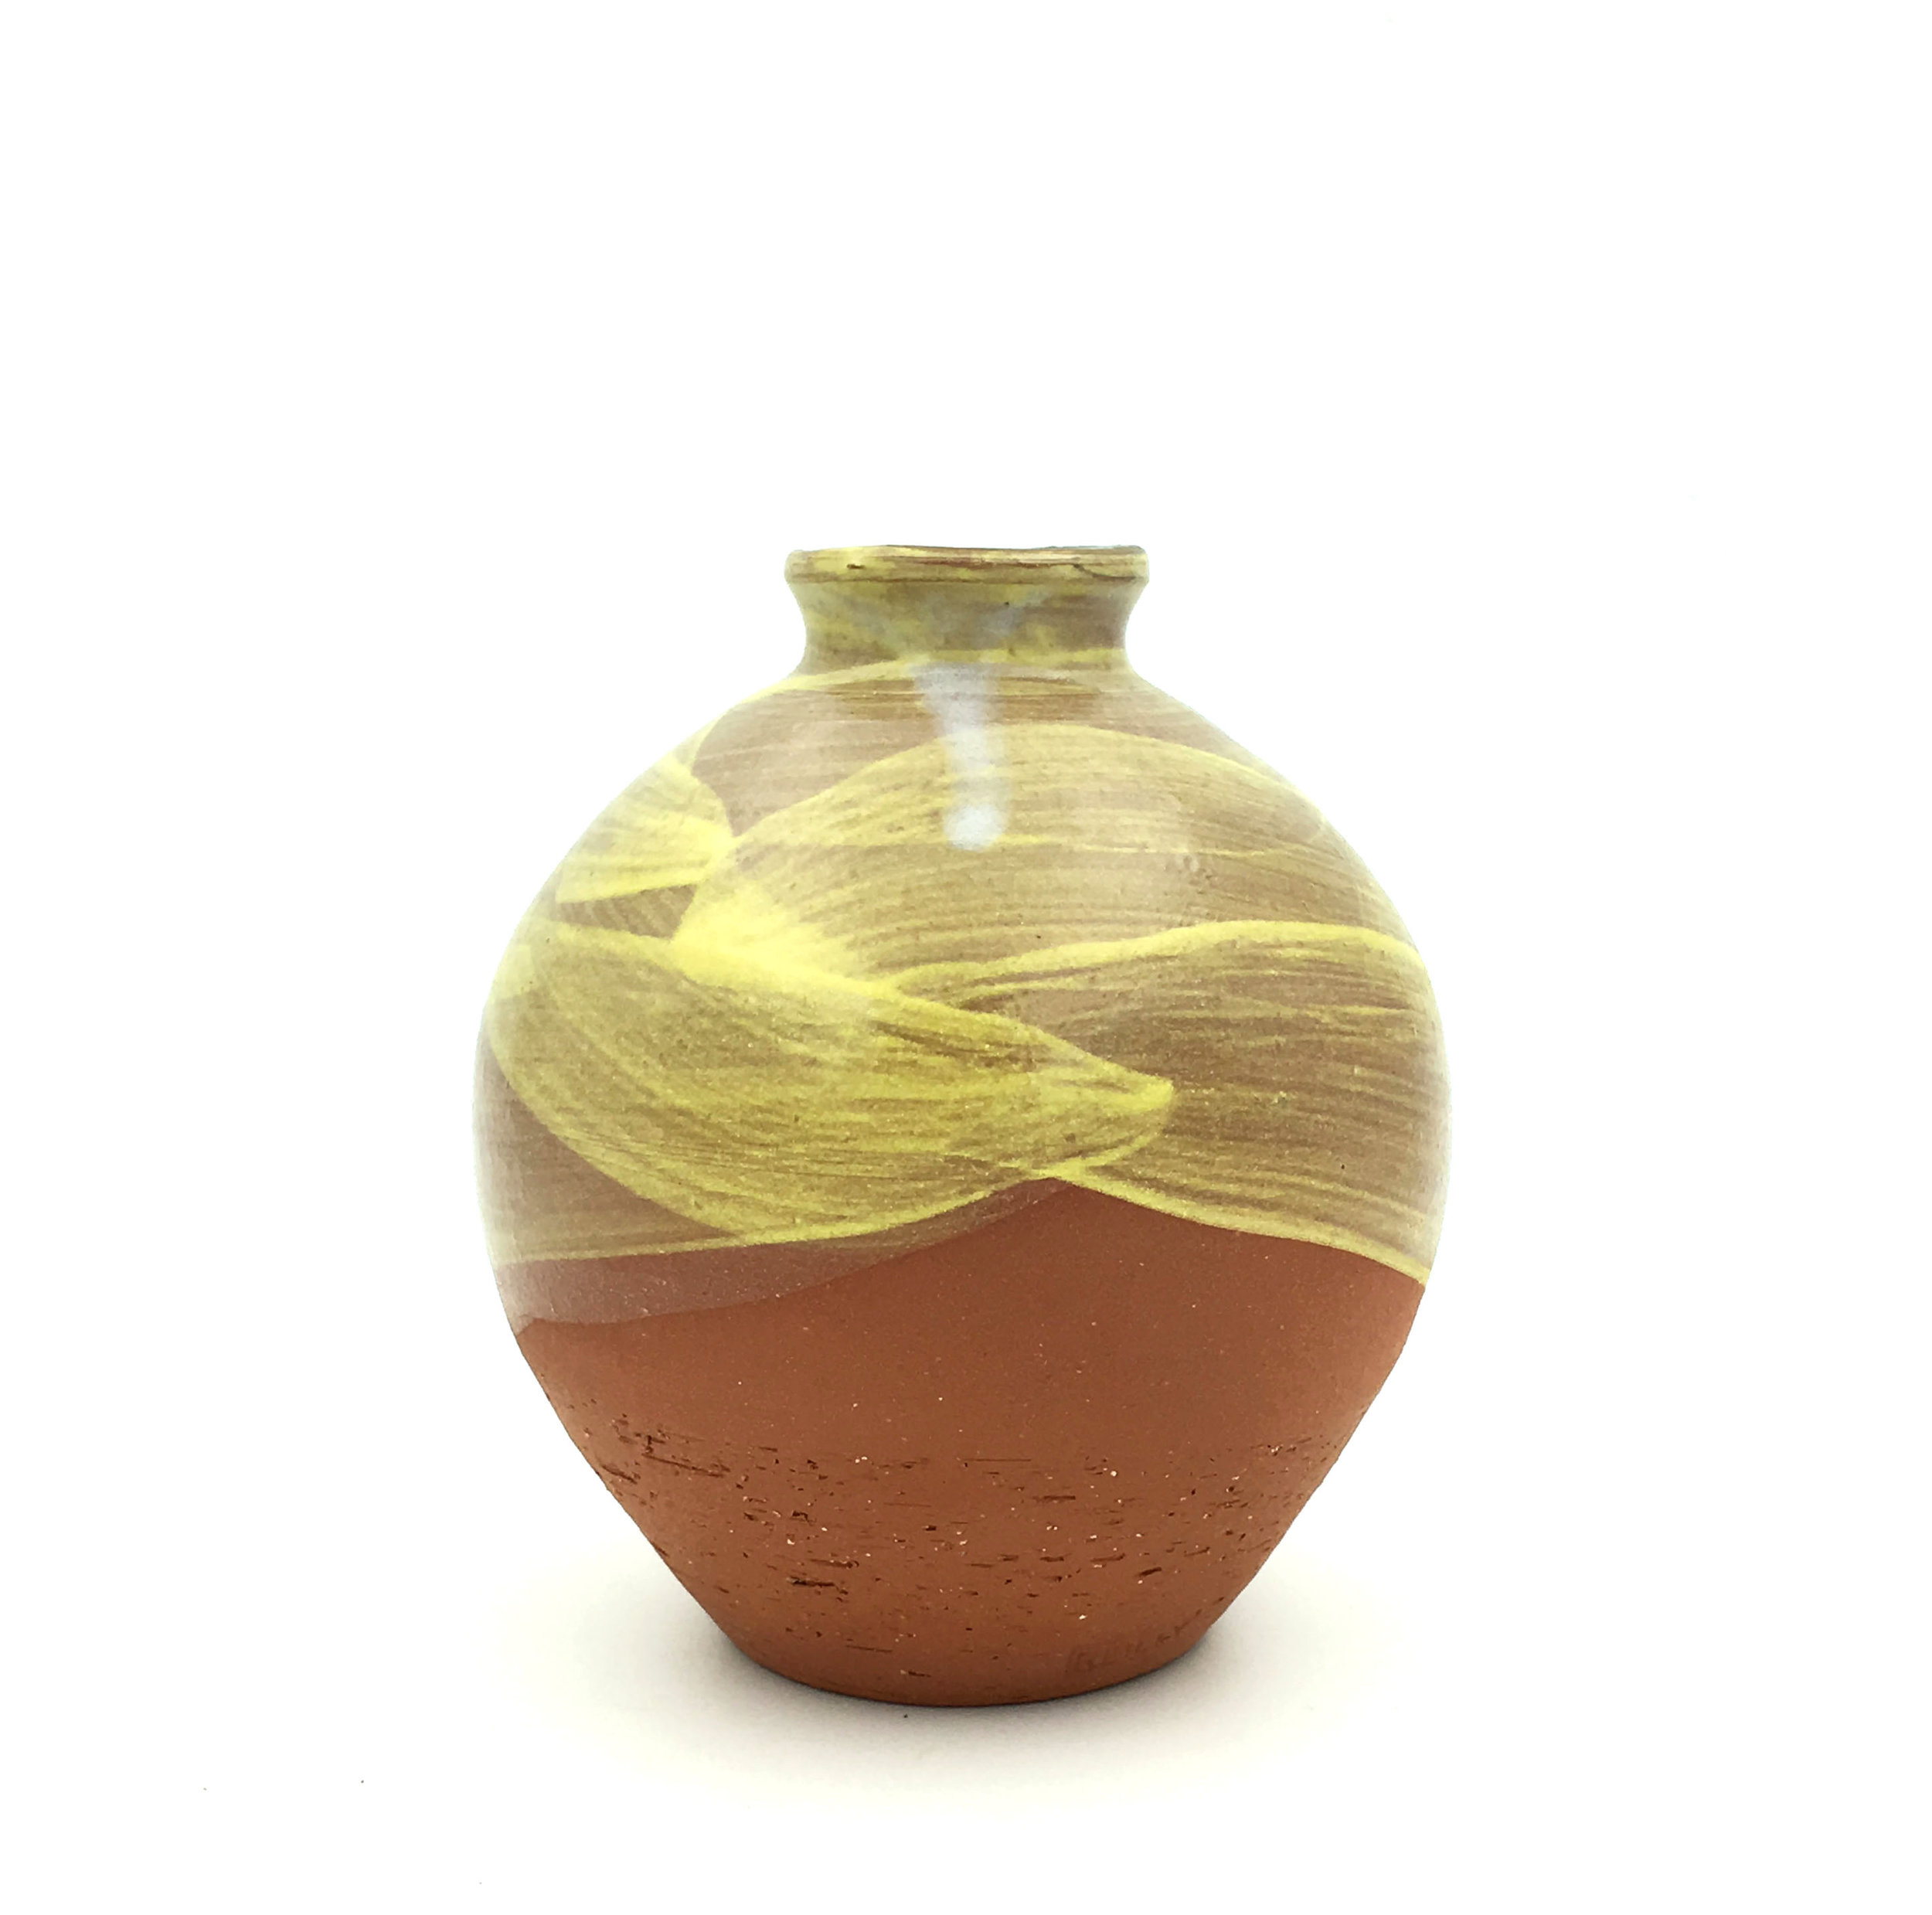    Bud Vase , earthenware with gold luster, 2017  